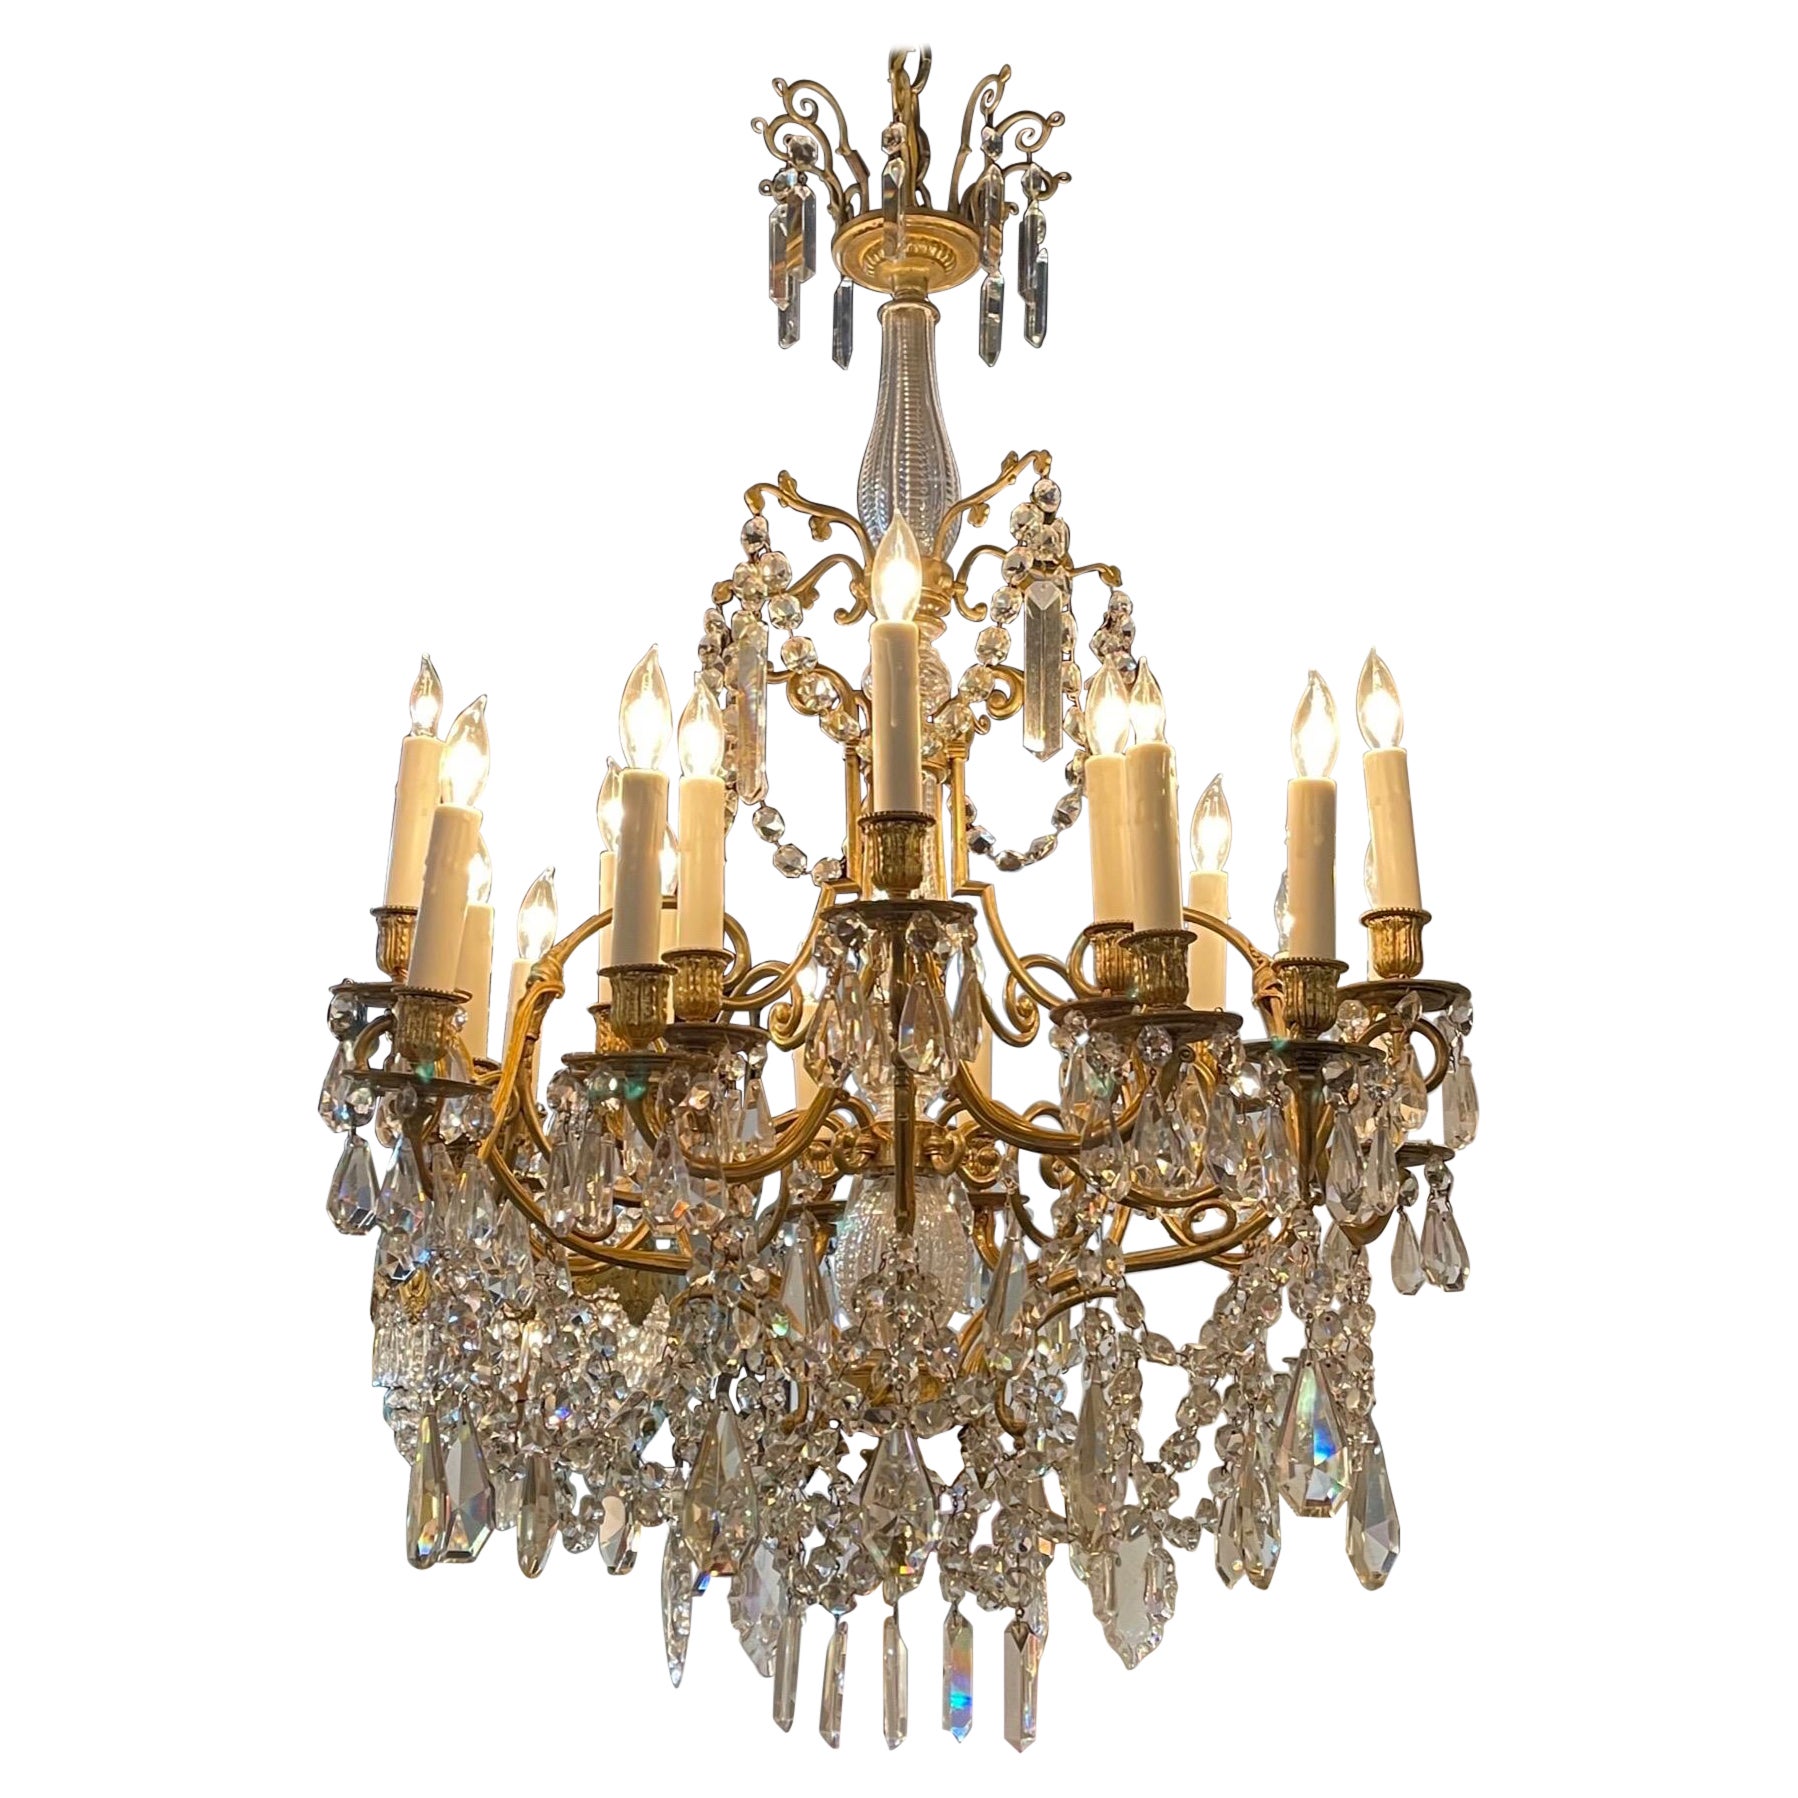 19th Century French Gilt Bronze and Crystal 20 Light Chandelier